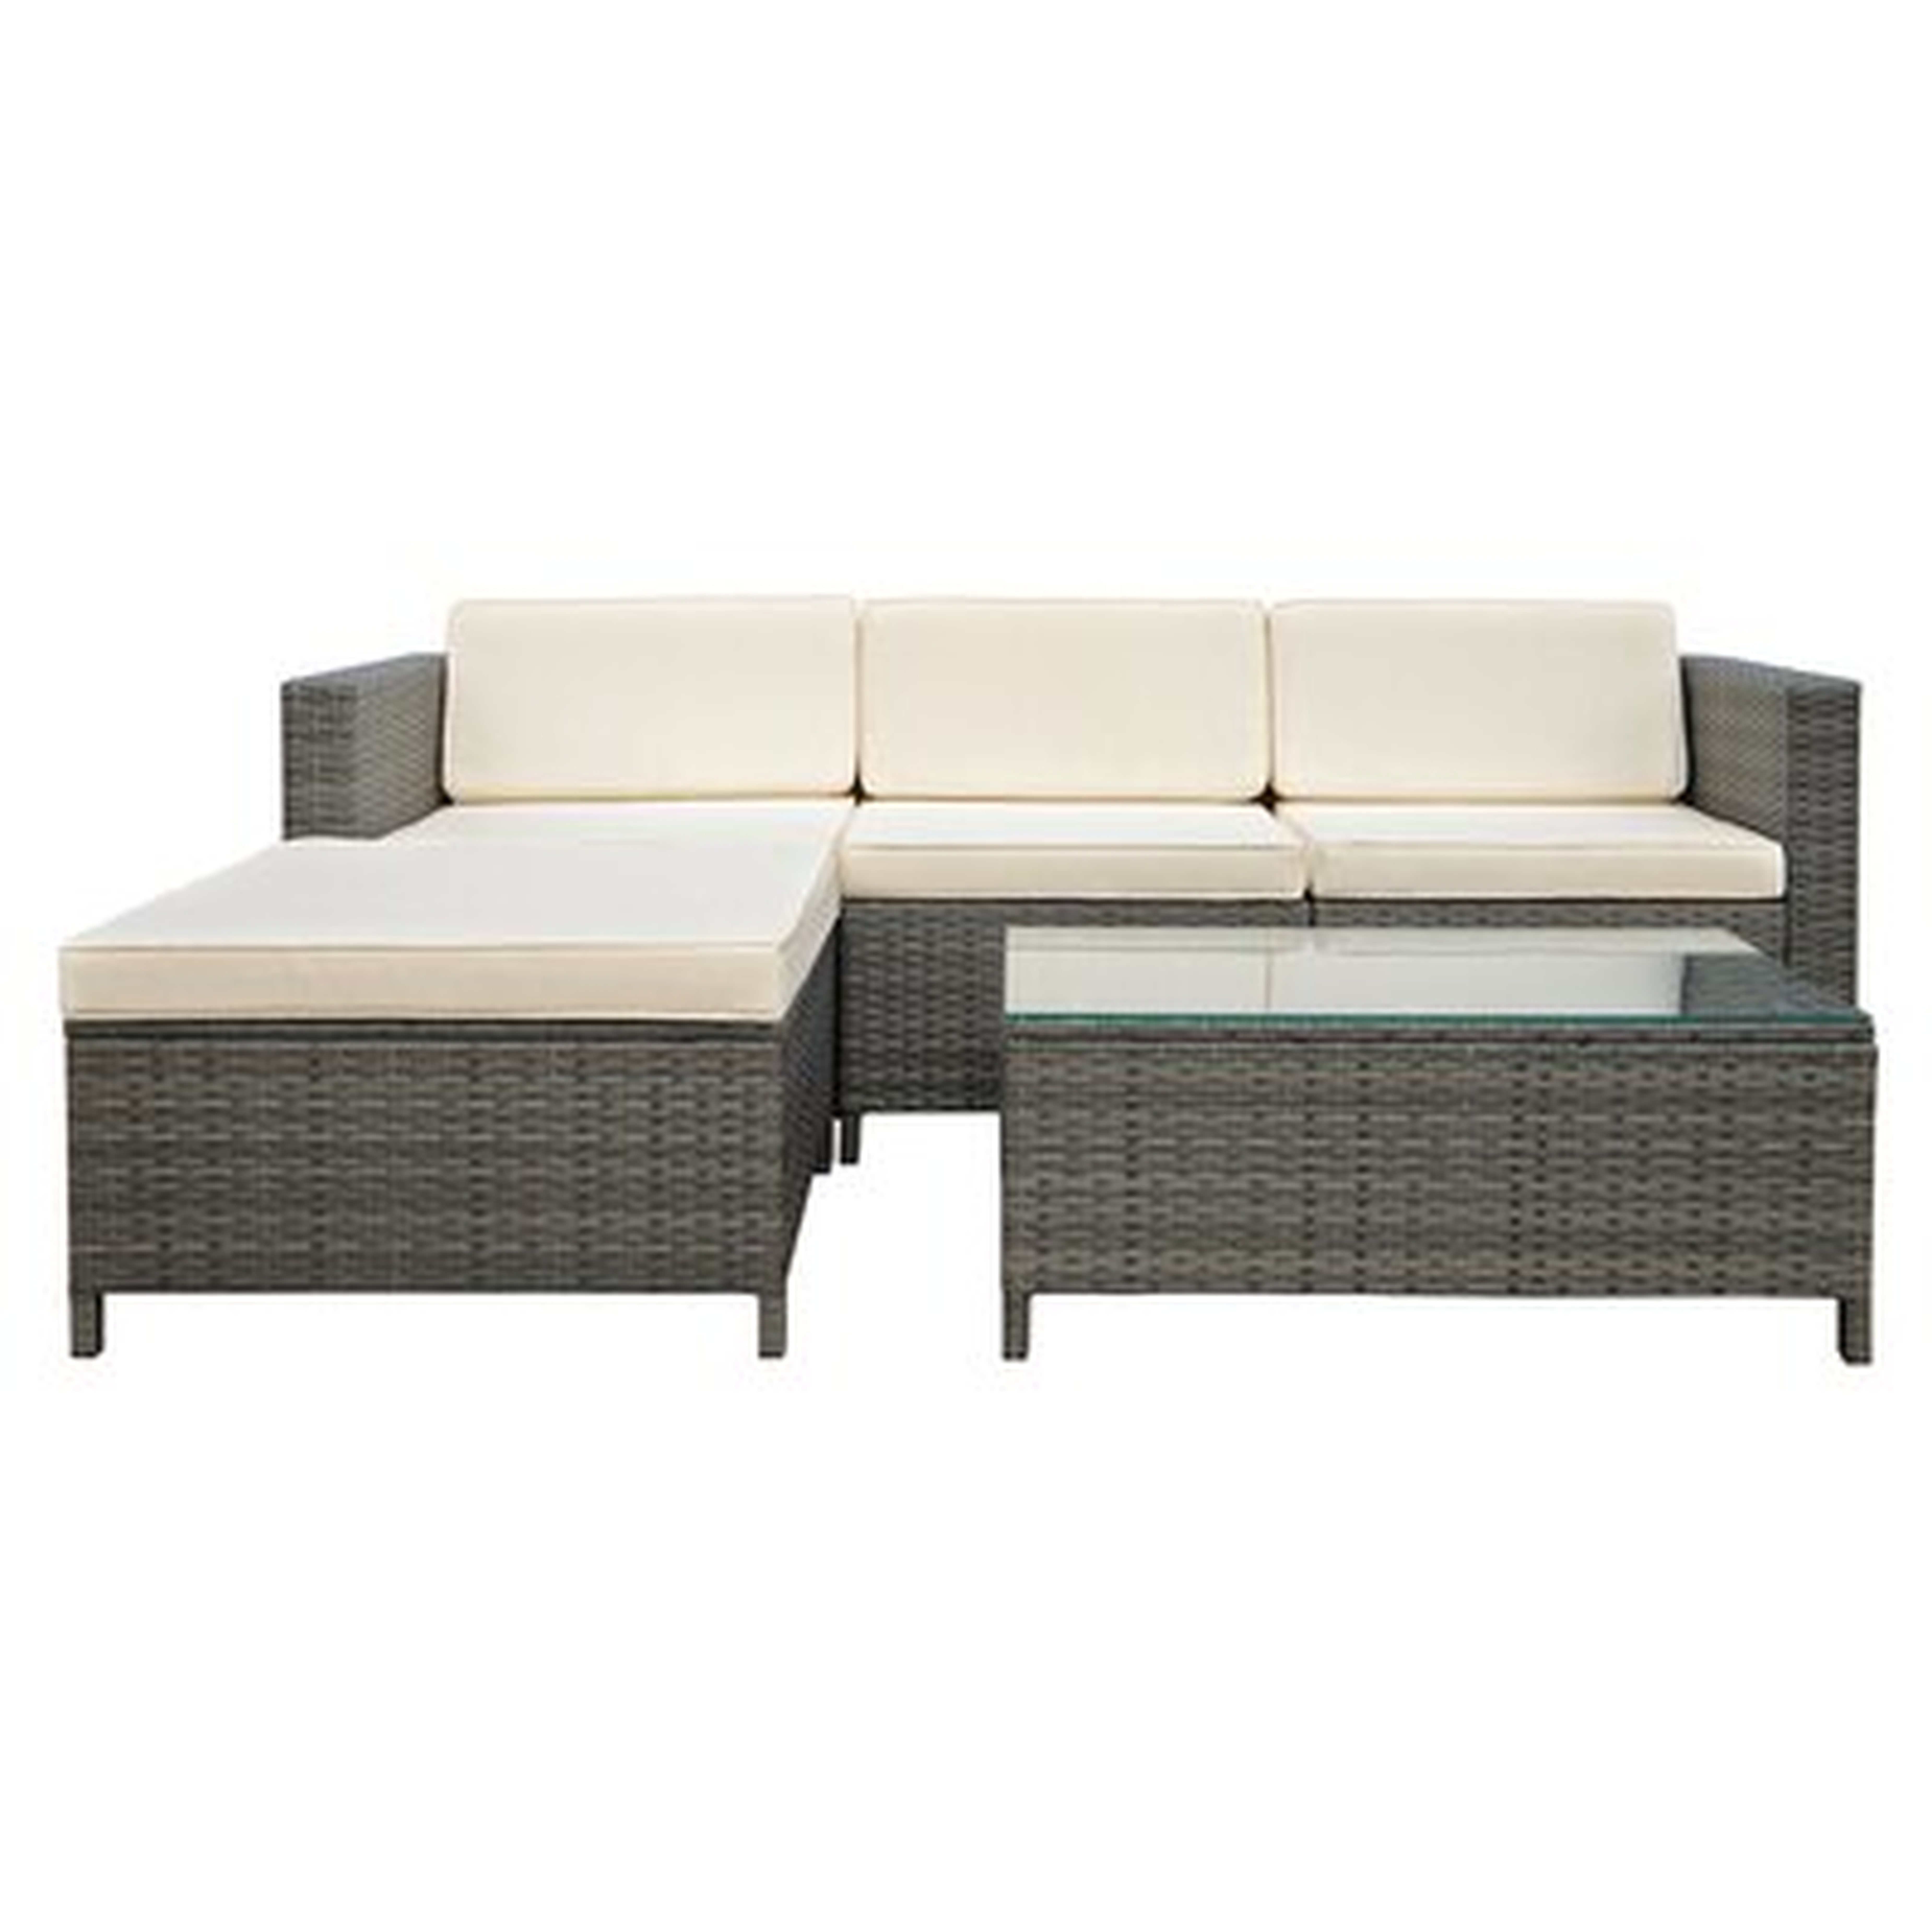 Patio Furniture Couch 5 Piece Set Sectional Rattan Sofa Sets,Dark Grey Wicker With Grey Cushions - Wayfair